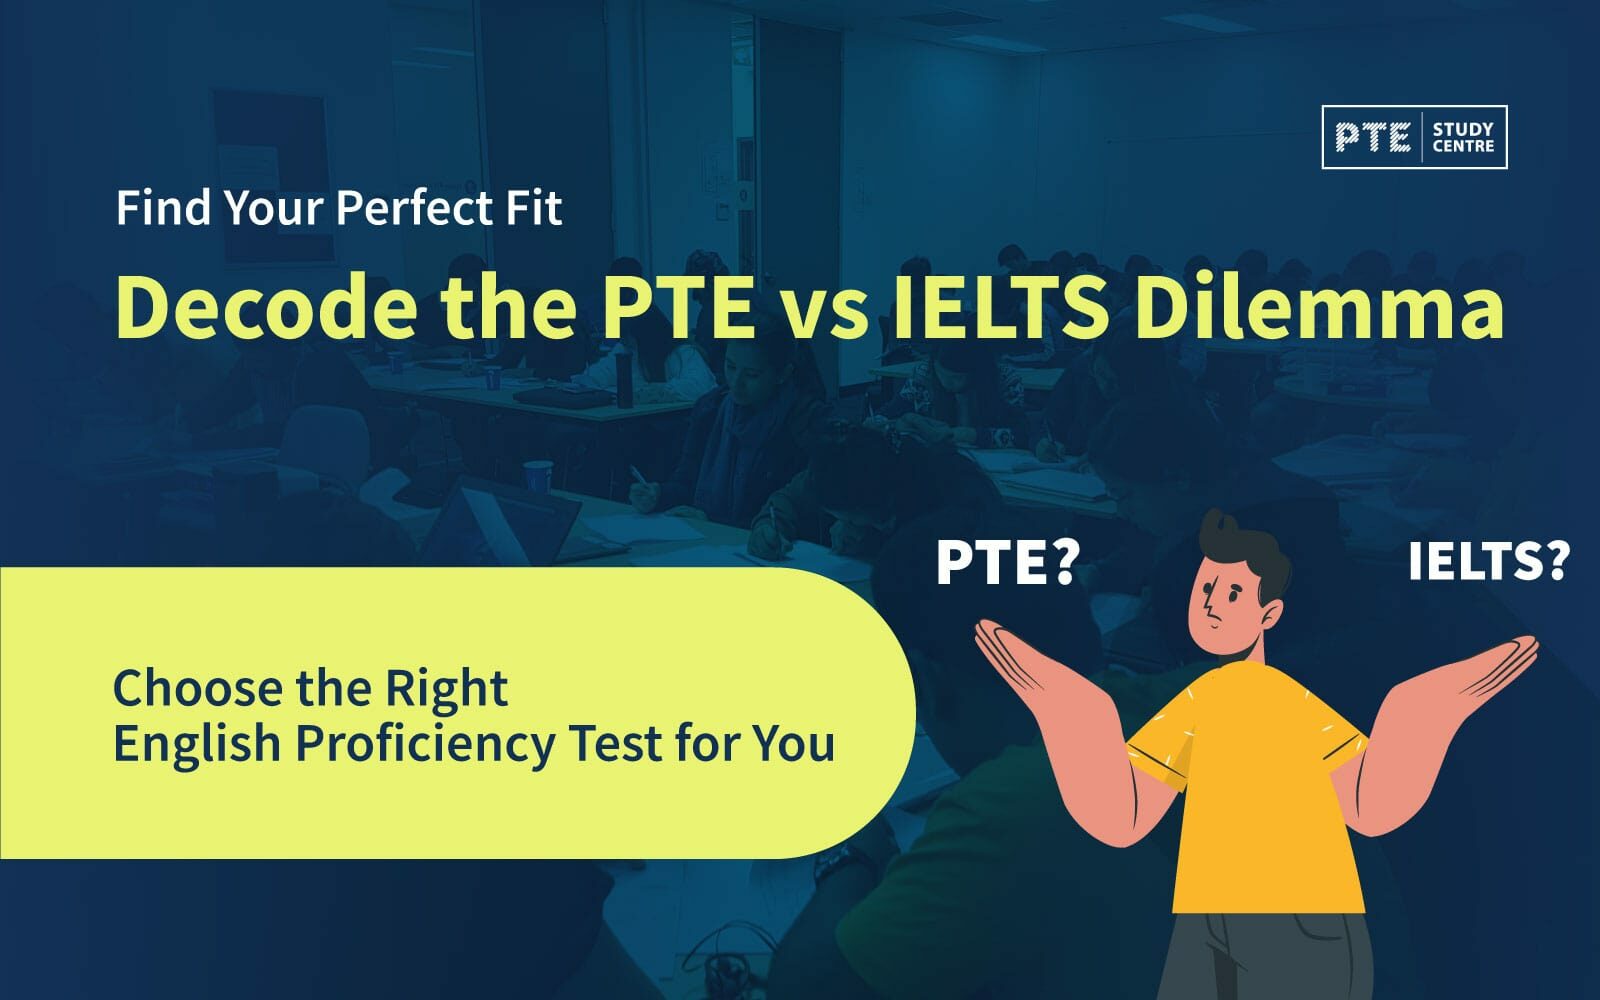 Find Your Perfect Fit: Decode the PTE vs IELTS Dilemma and Choose the Right English Proficiency Test for You image